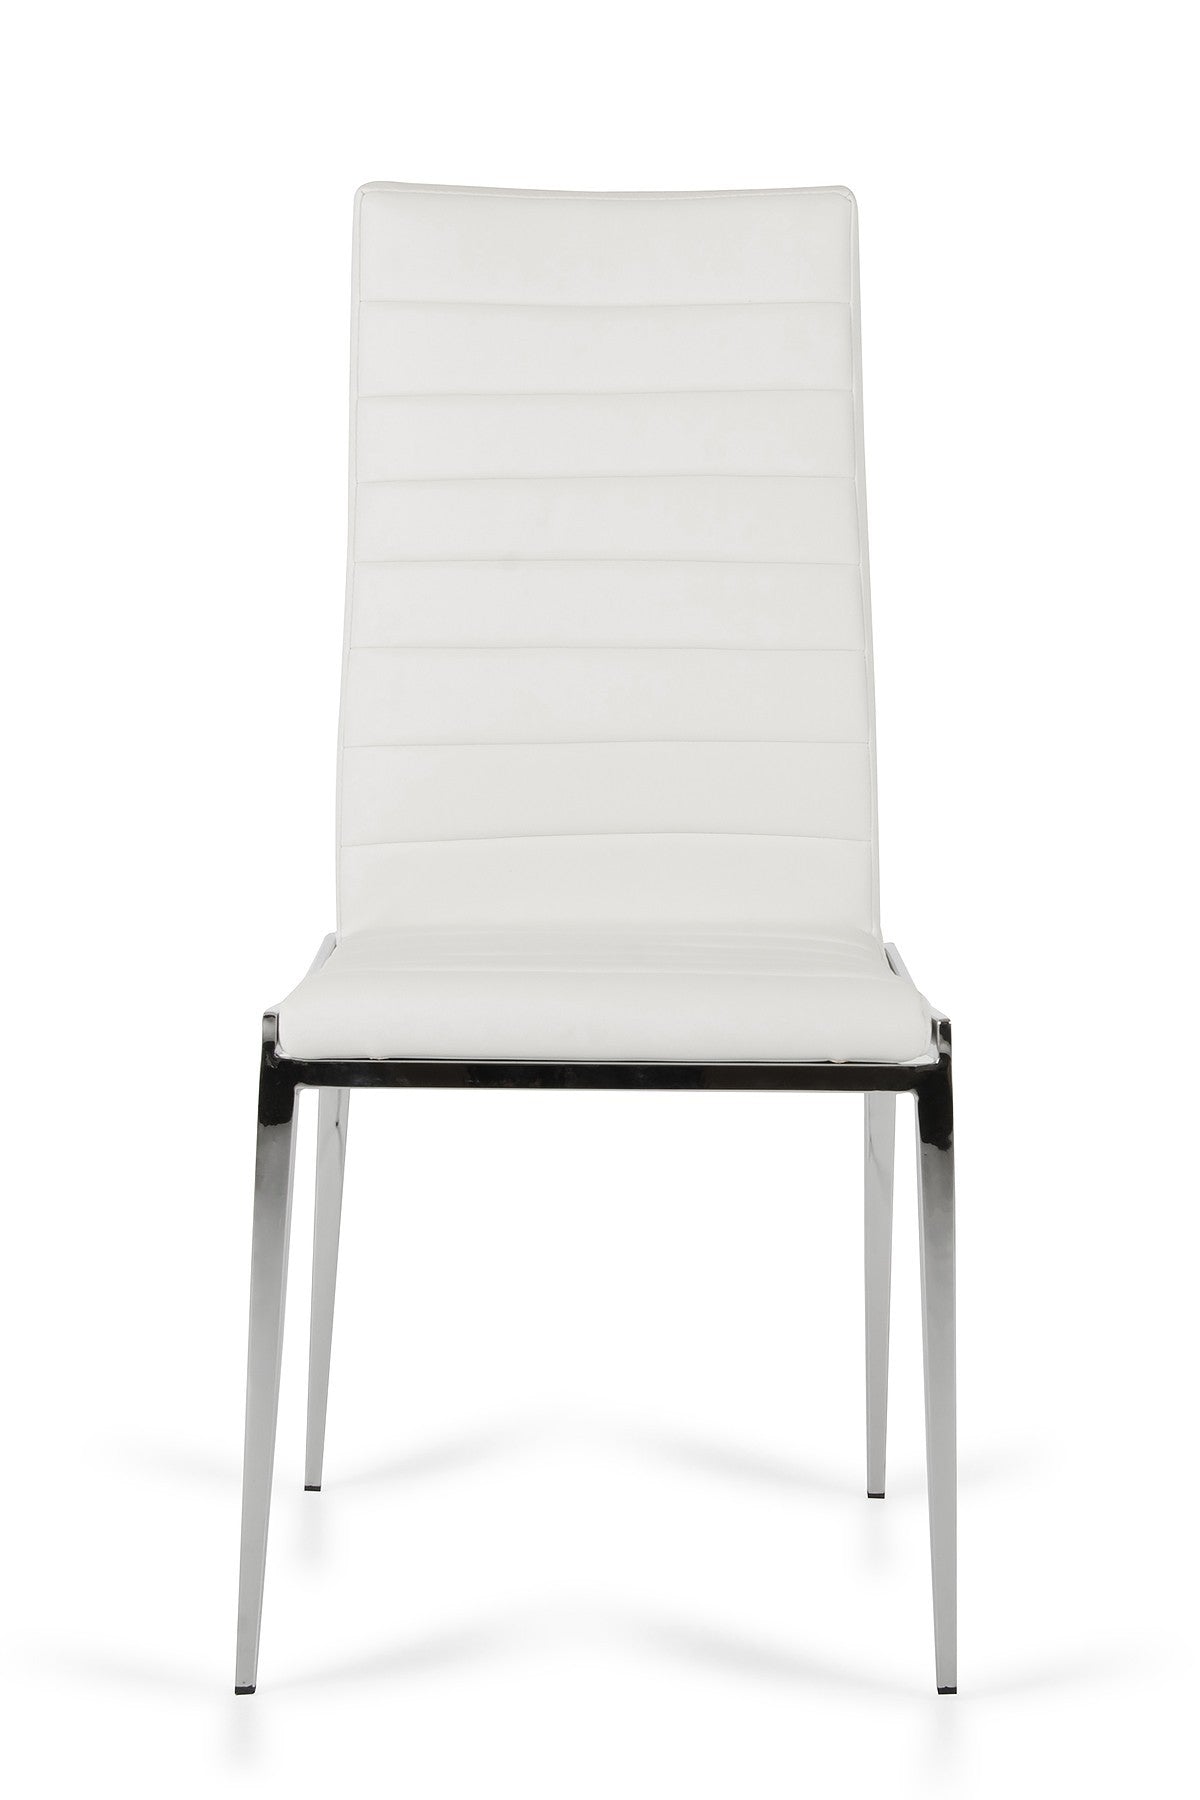 Libby - Modern White Leatherette Dining Chair (Set Of 2)